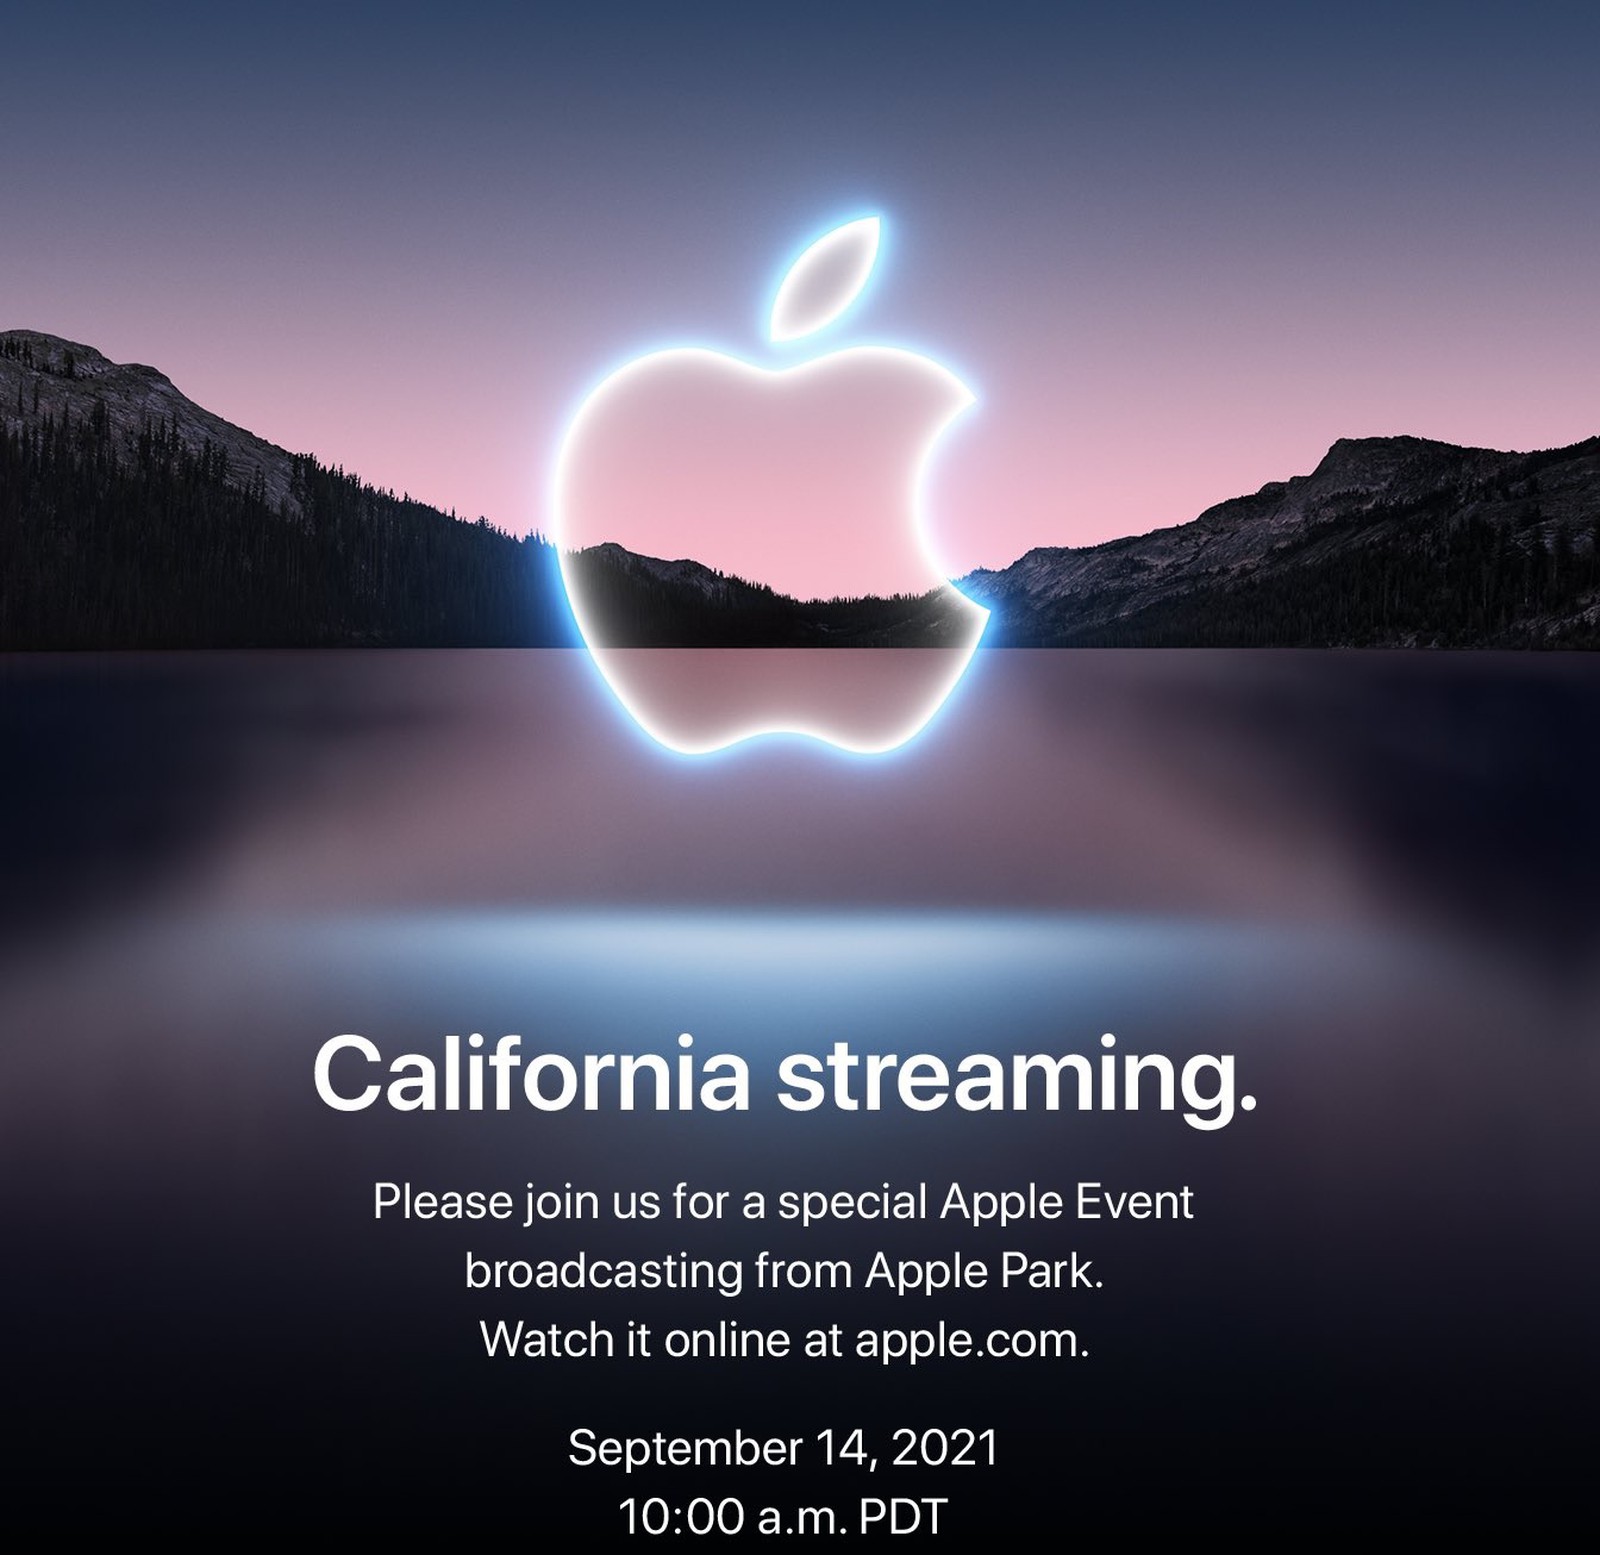 Apple’s event announcement “California Streaming” on September 14 With